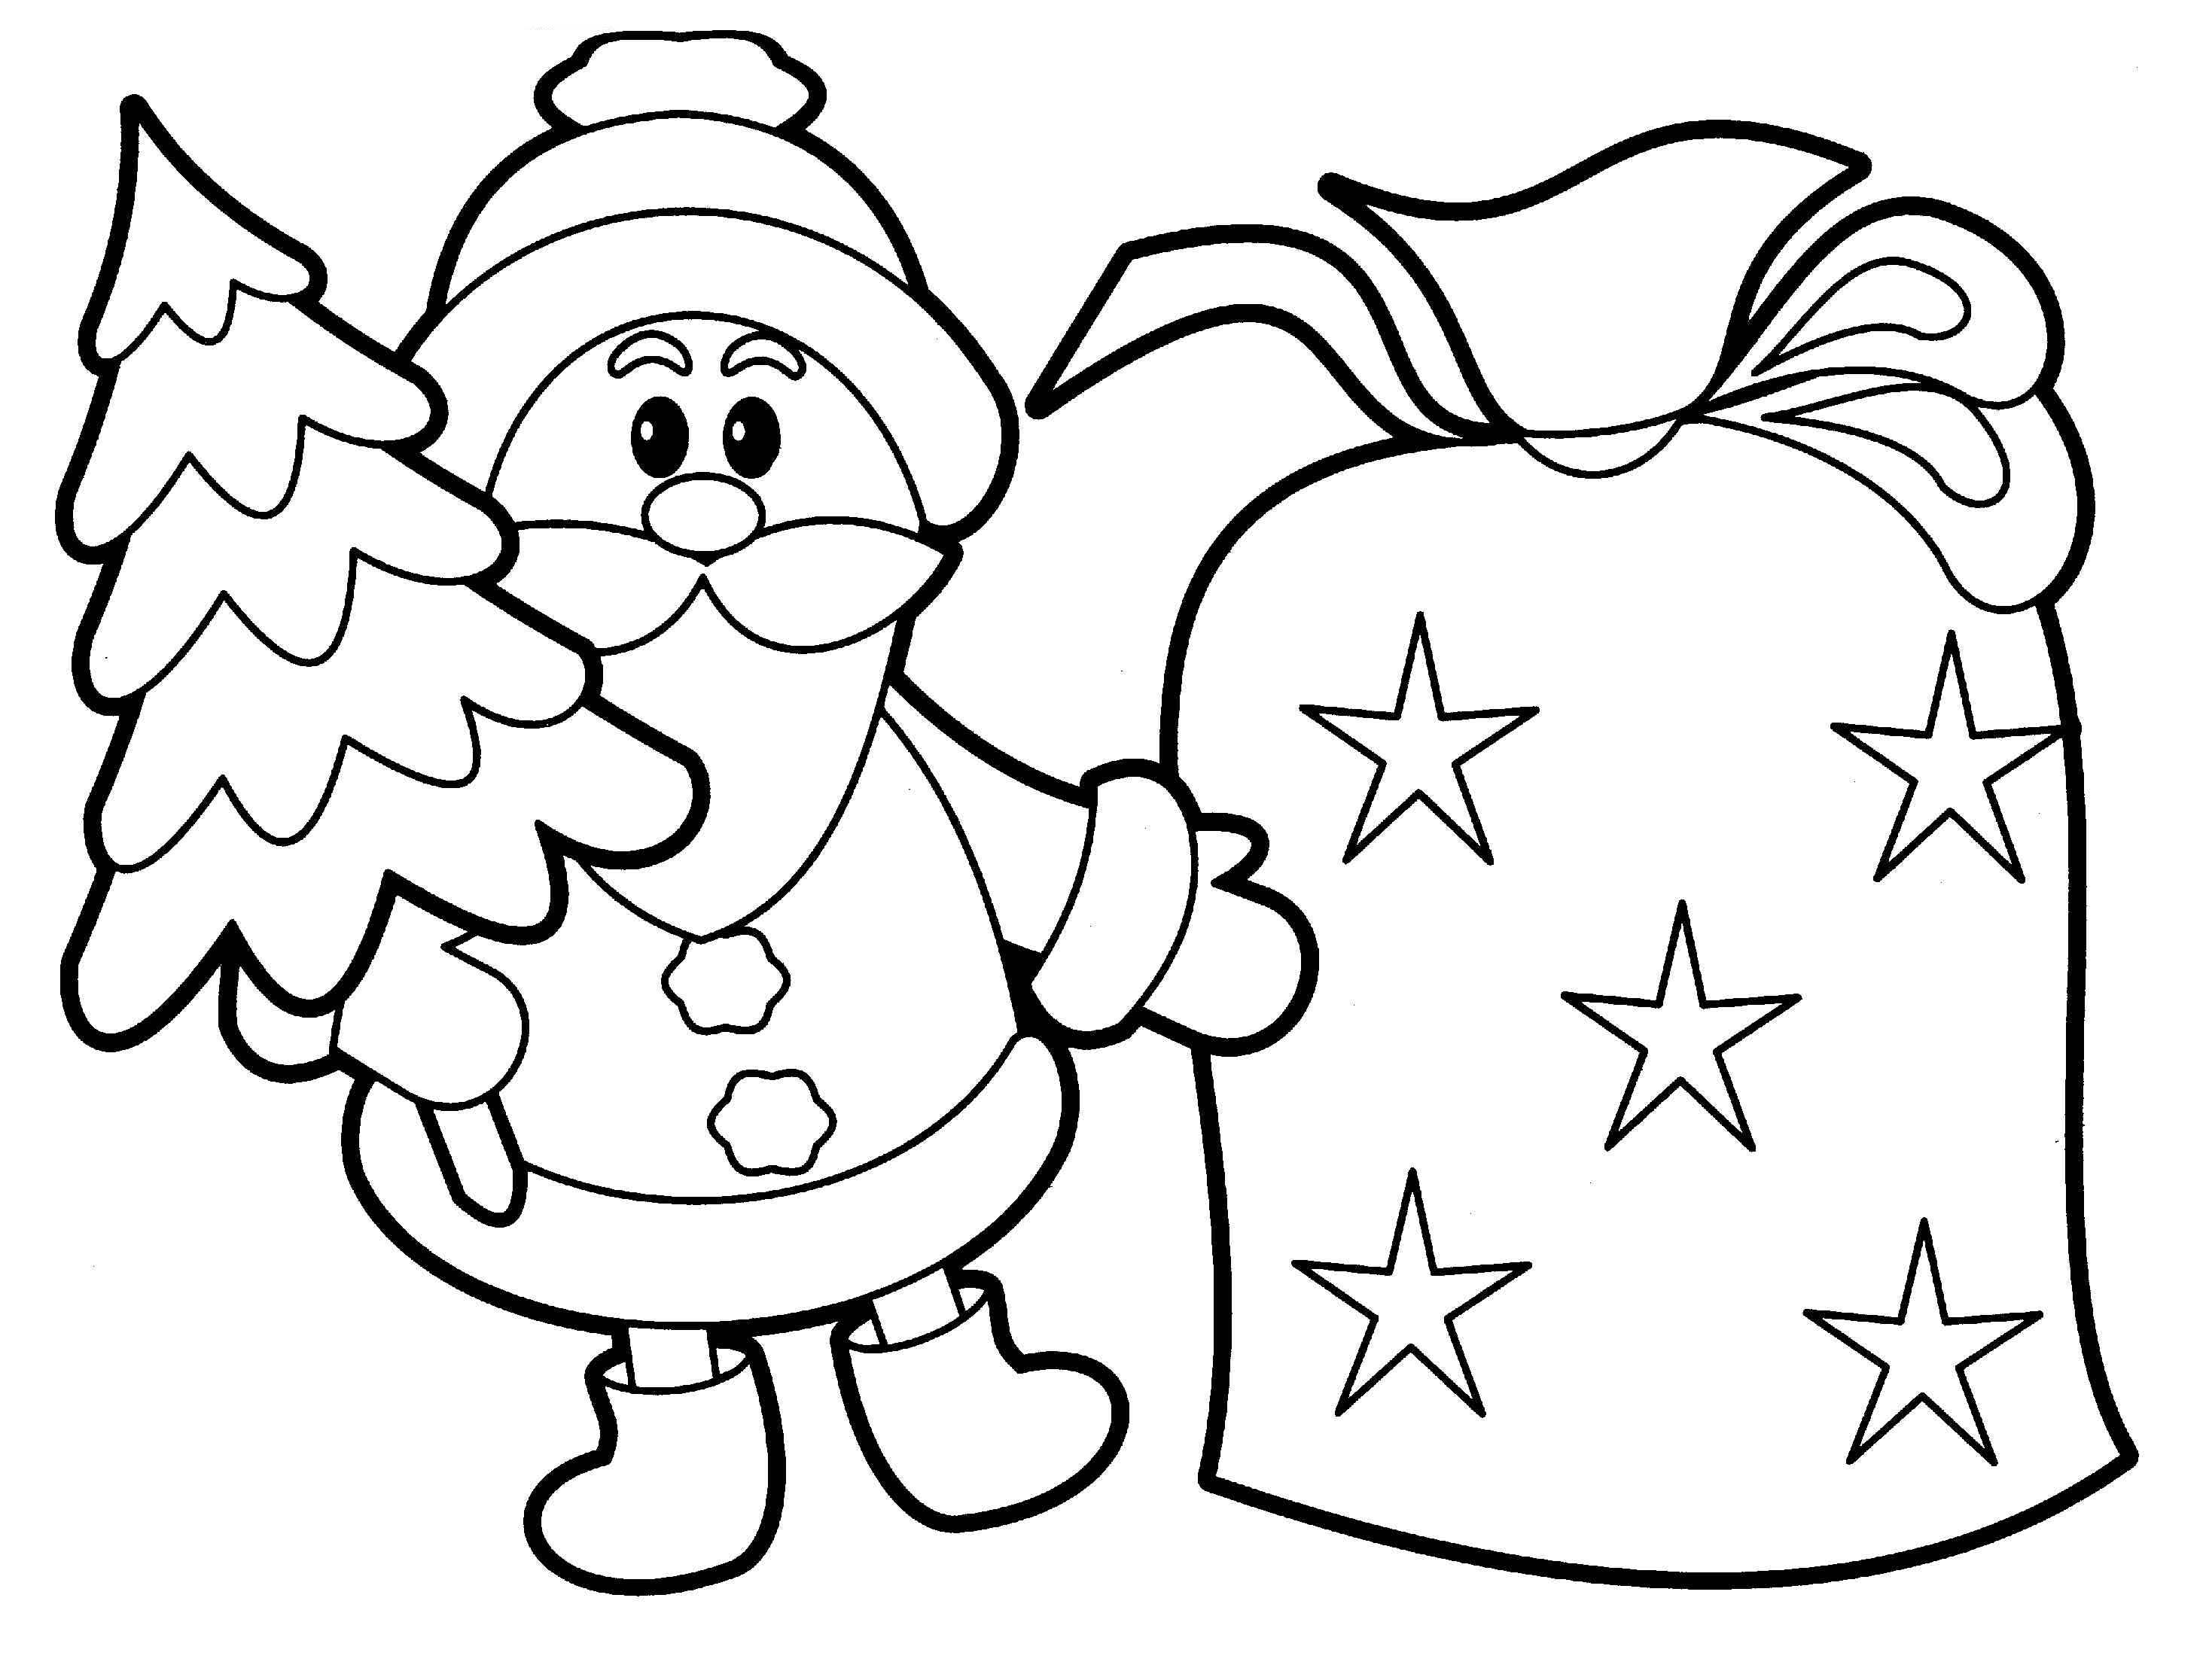 Santa claus coloring pages to download and print for free